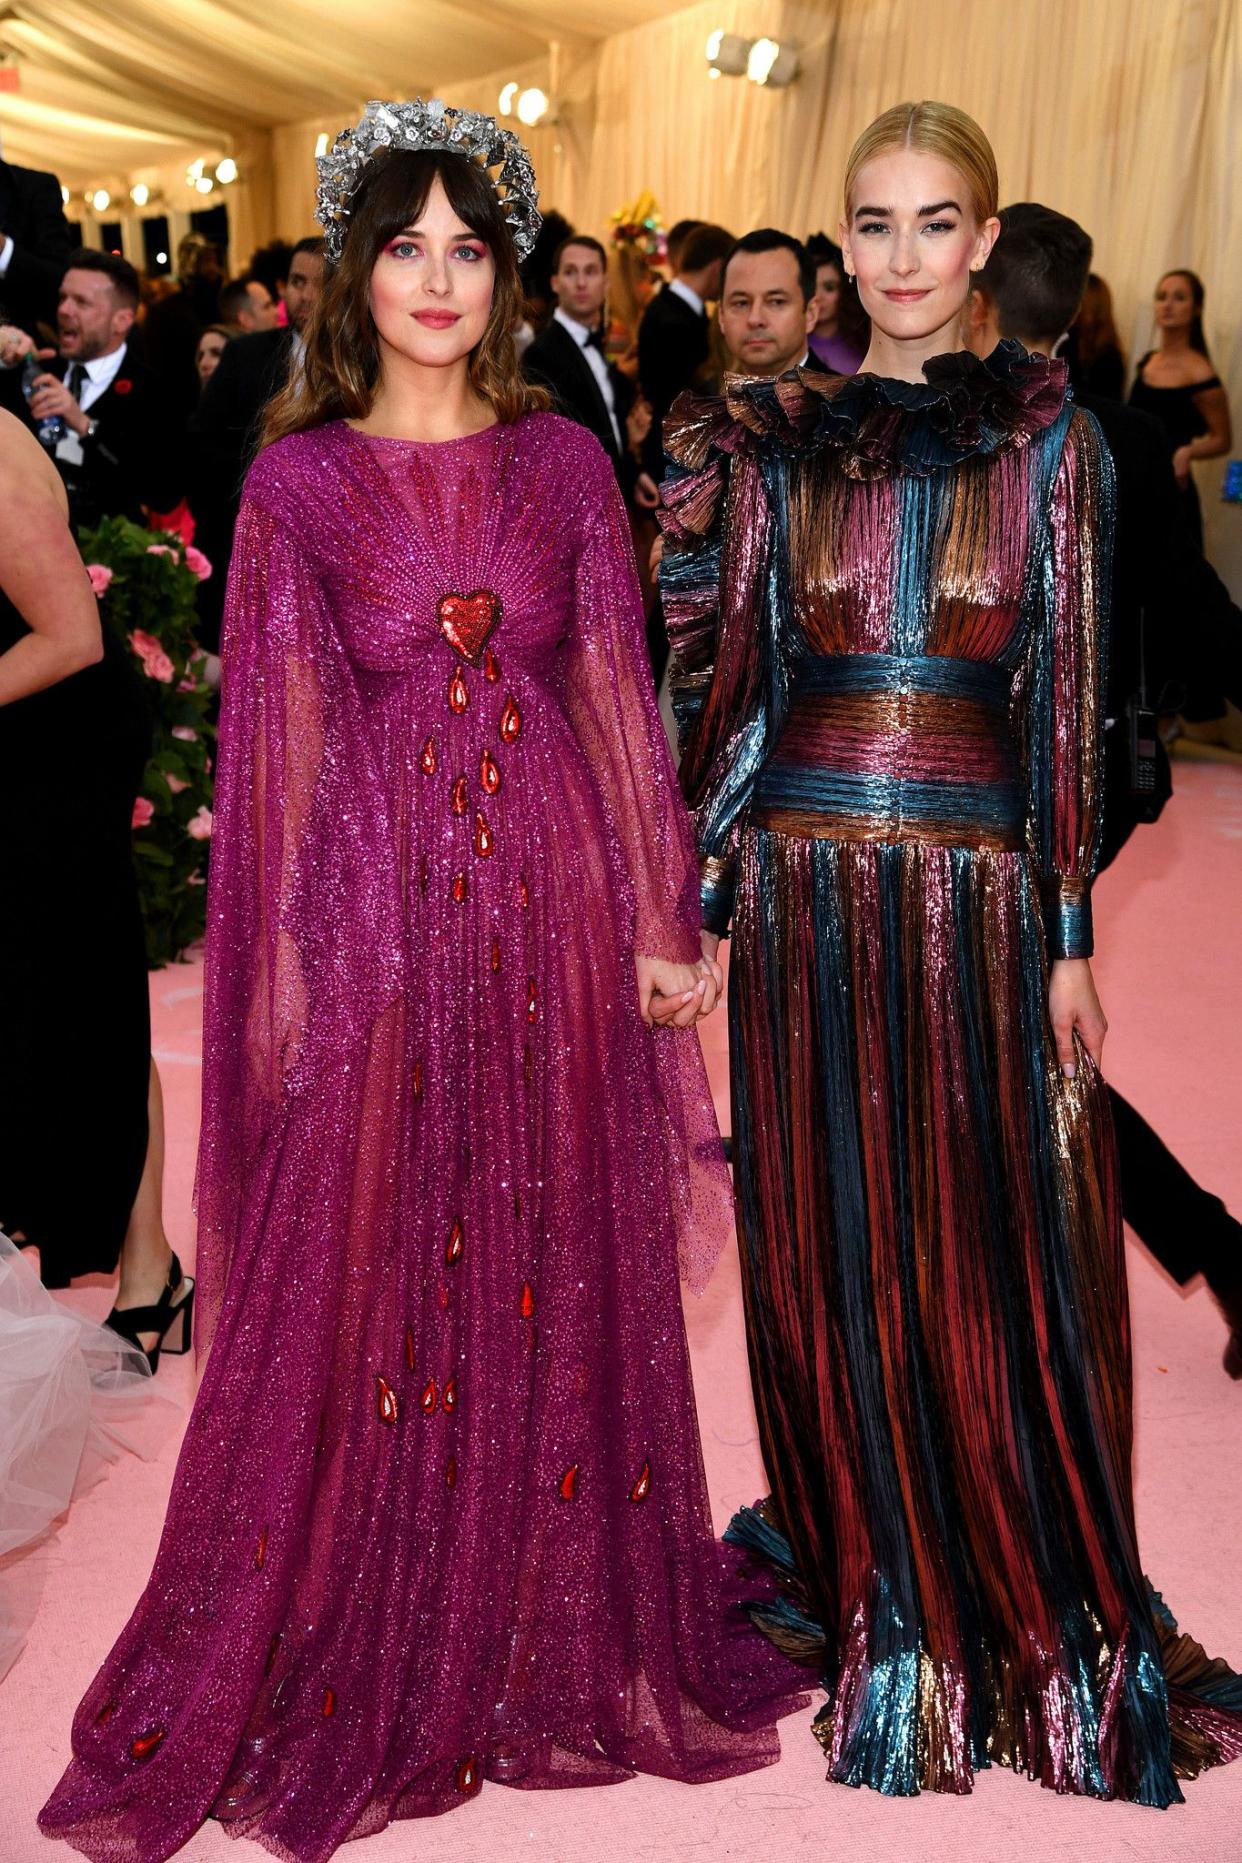 Dakota Johnson and Grace Johnson attend The 2019 Met Gala Celebrating Camp: Notes on Fashion at Metropolitan Museum of Art on May 06, 2019 in New York City.